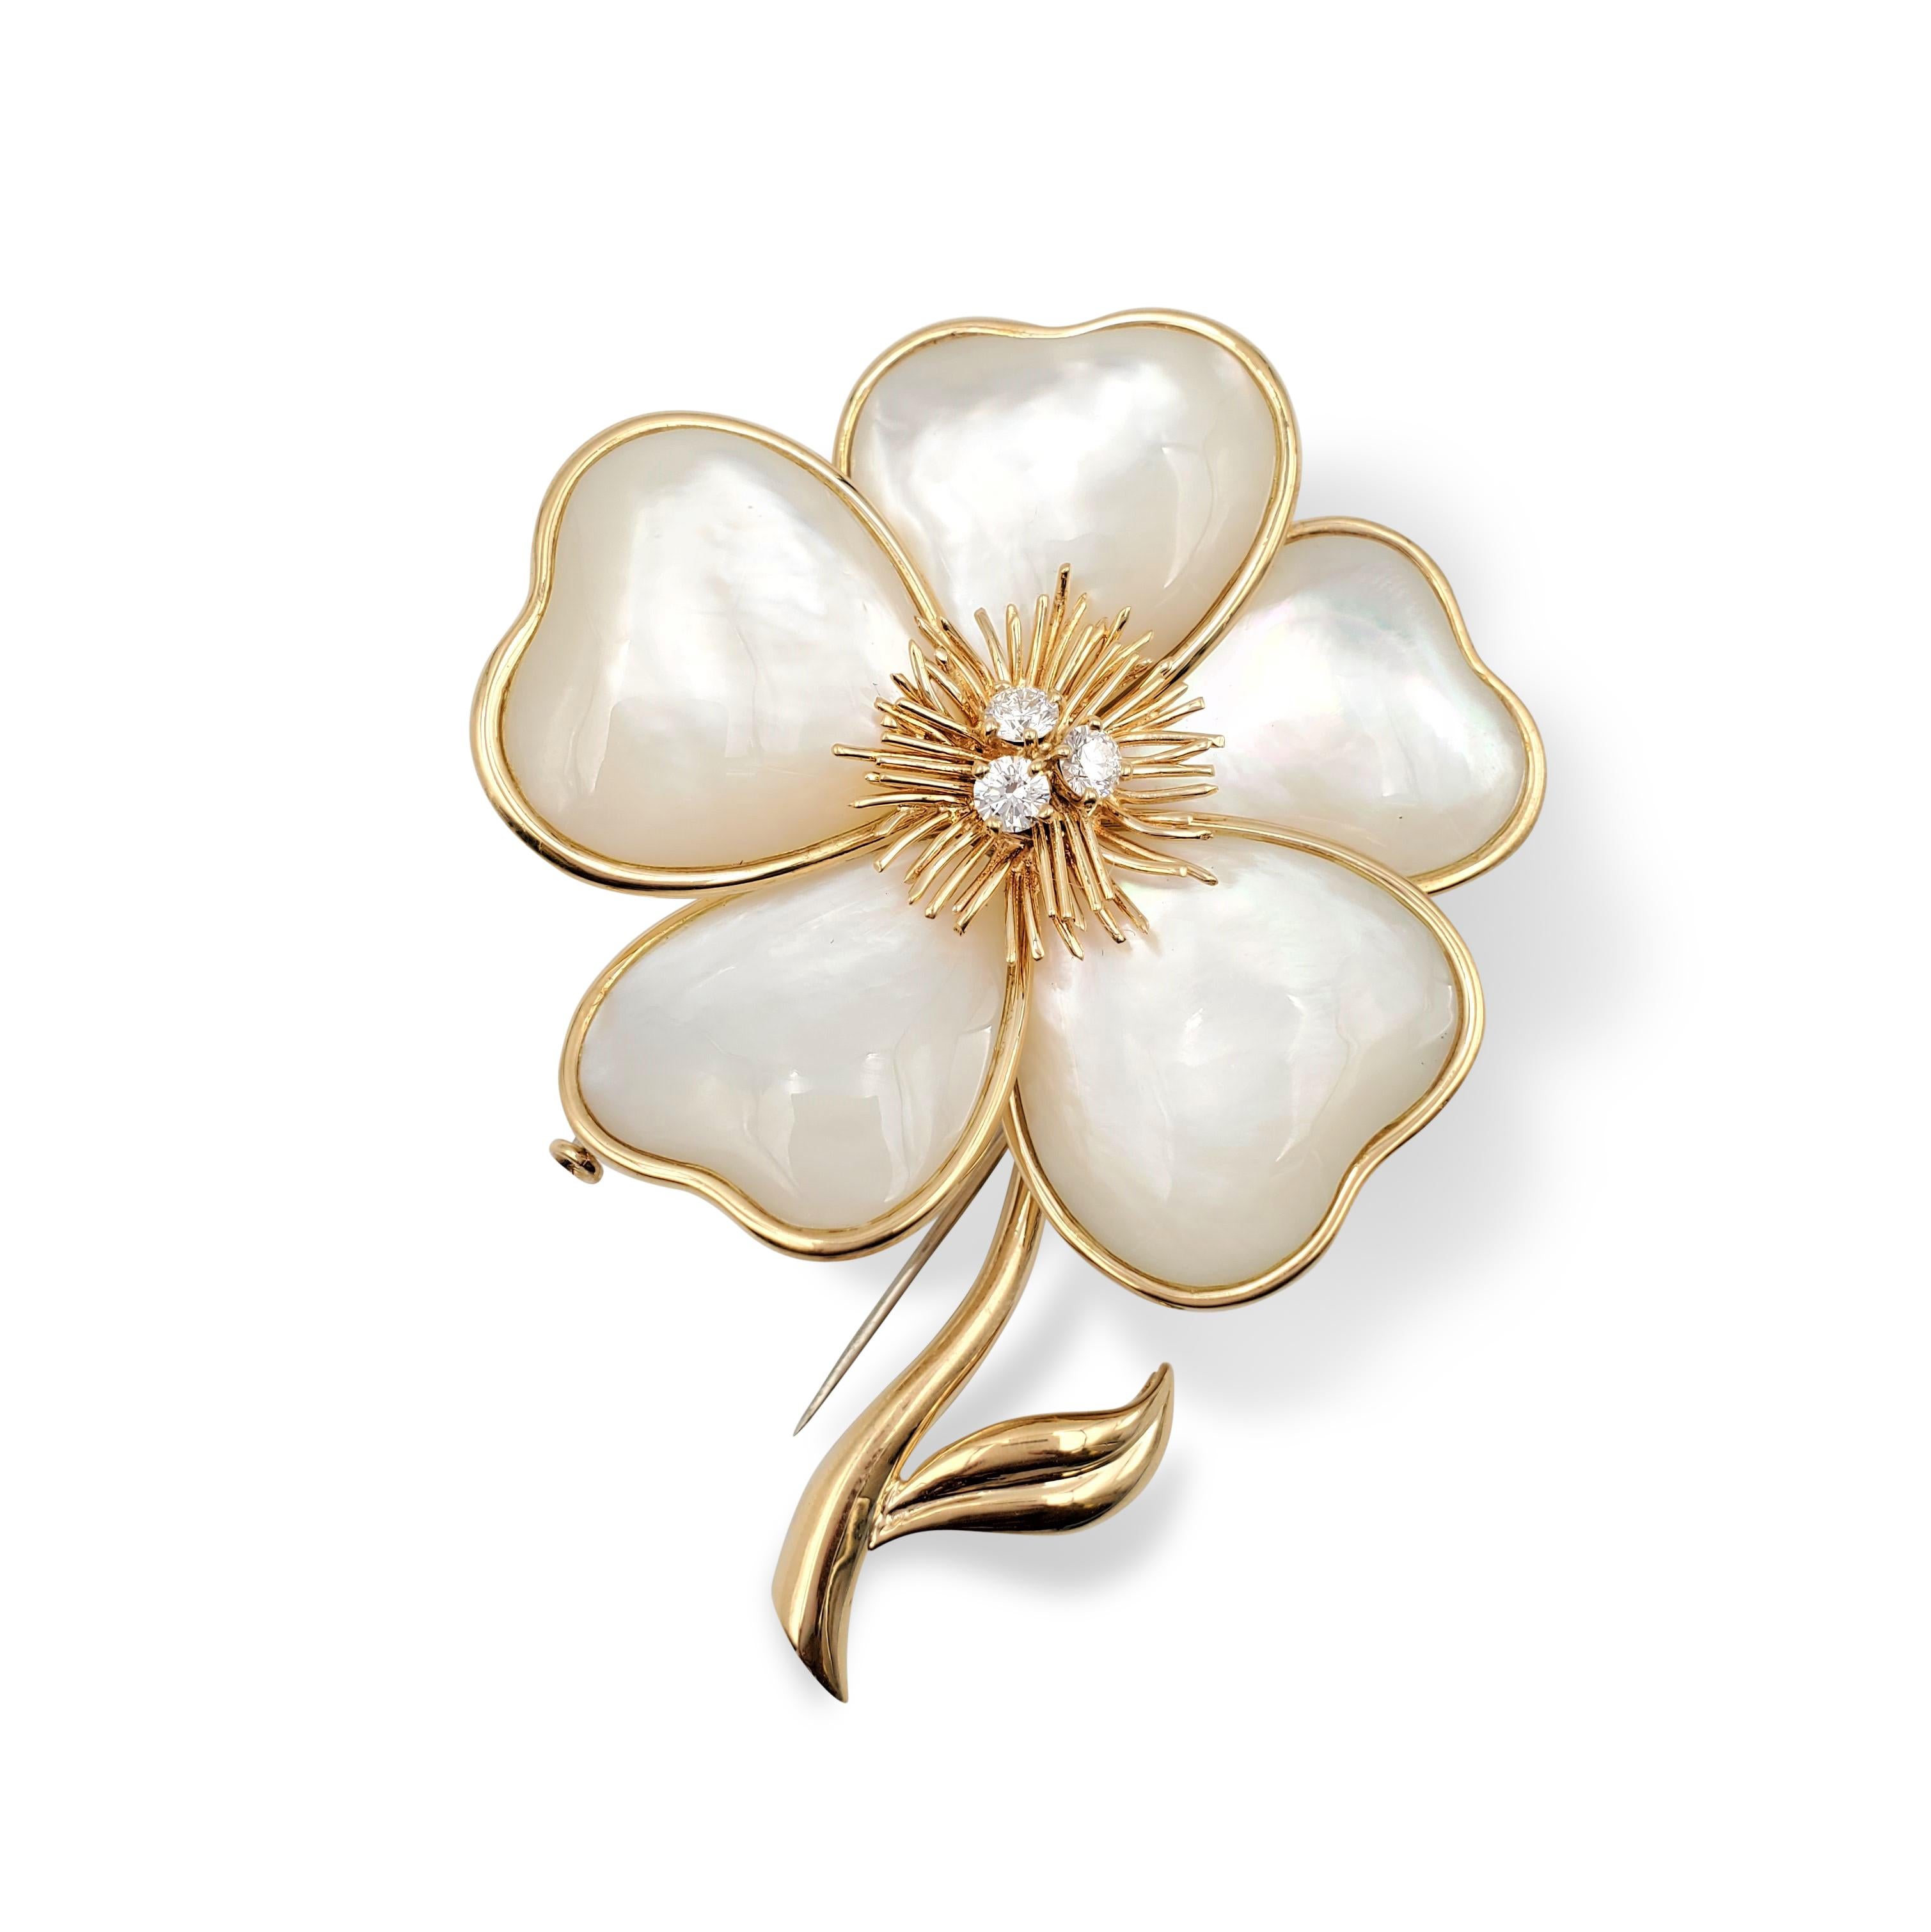 Authentic Van Cleef & Arpels Clématite pin designed as a clematis flower highlighted with round brilliant-cut diamonds (E-F color, VS clarity) weighing an estimated 0.60 carats on spiked gold filaments. The mother-of-pearl segments of flower petals